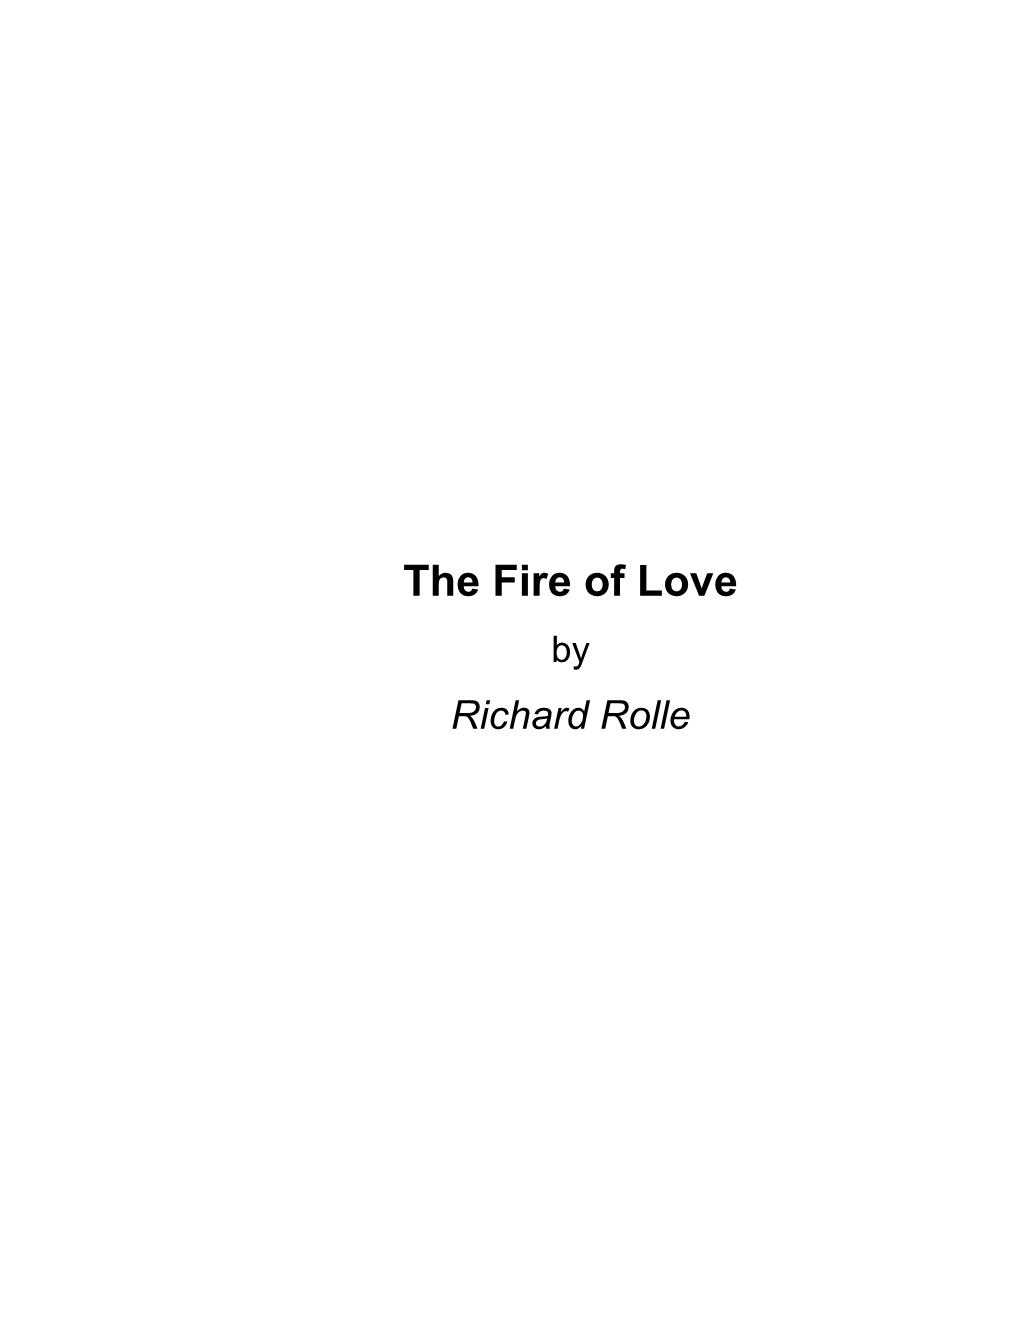 The Fire of Love by Richard Rolle About the Fire of Love by Richard Rolle